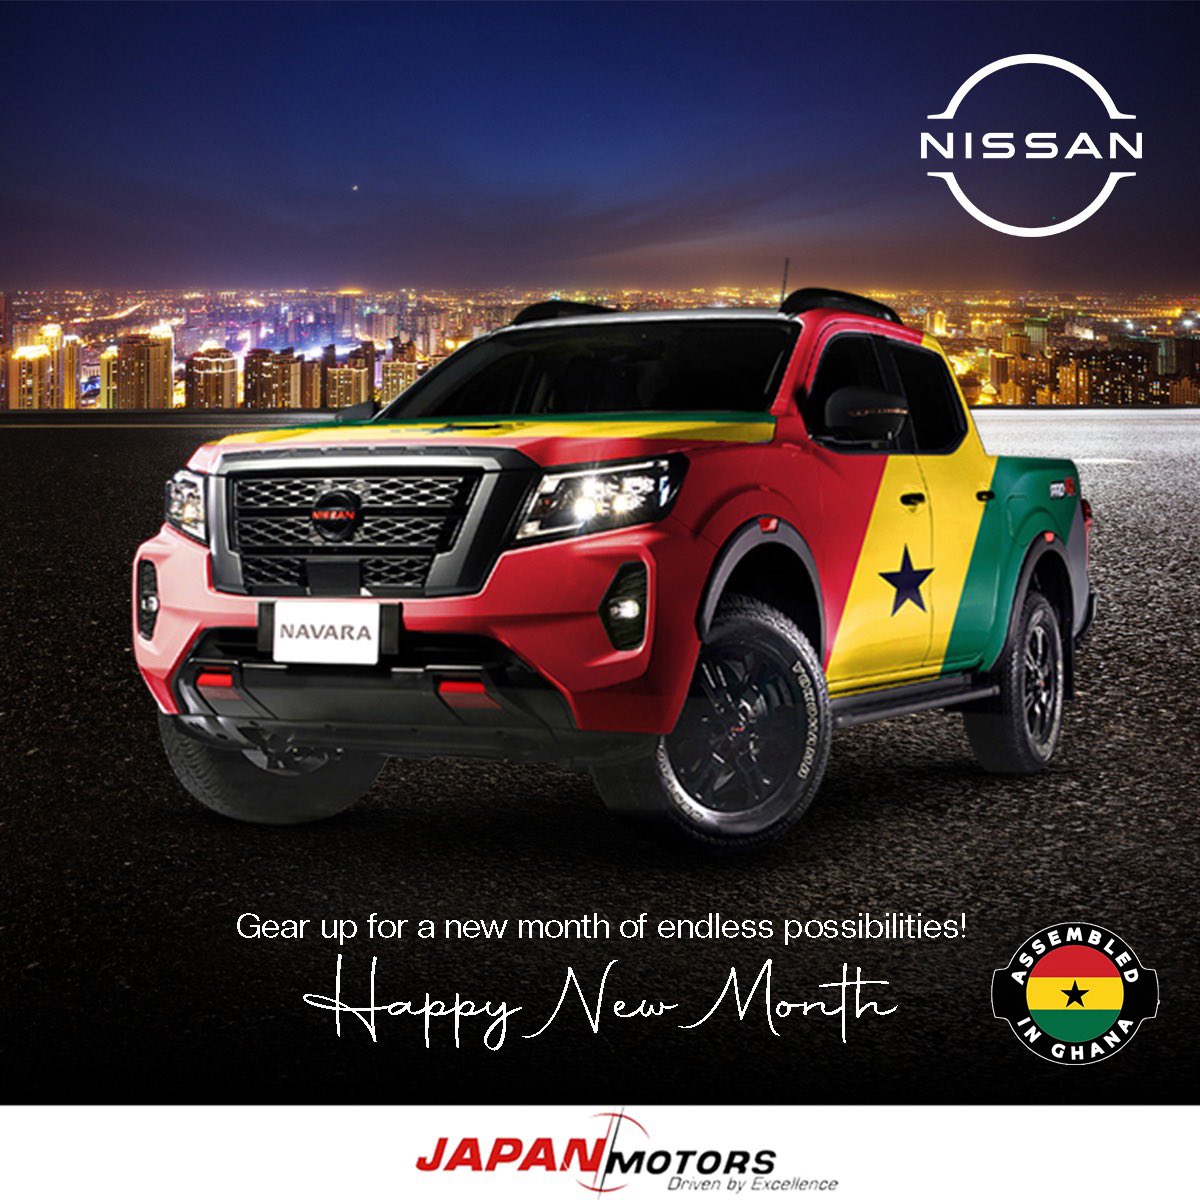 Gear up for a new month of endless possibilities! As the road unfolds, may your Nissan journey be filled with joy, success, and unforgettable adventures. Happy New Month! #Newmonth #JapanMotors #NissanGhana #SolidarityForever #Nissan #NewMonthJourney